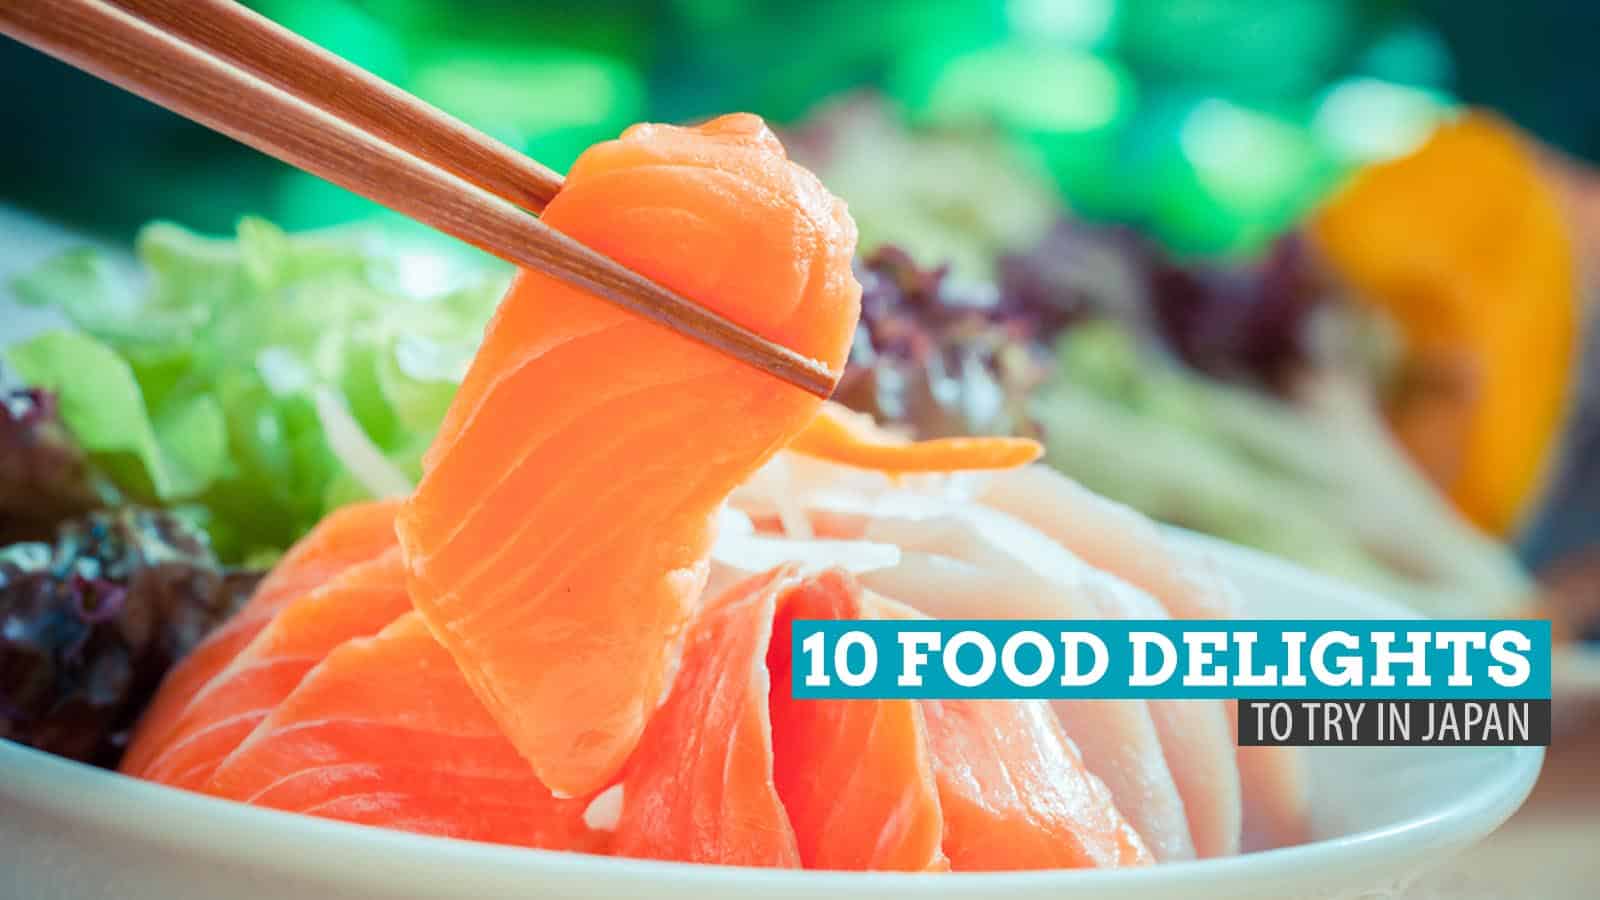 10 Food Delights to Try in Japan